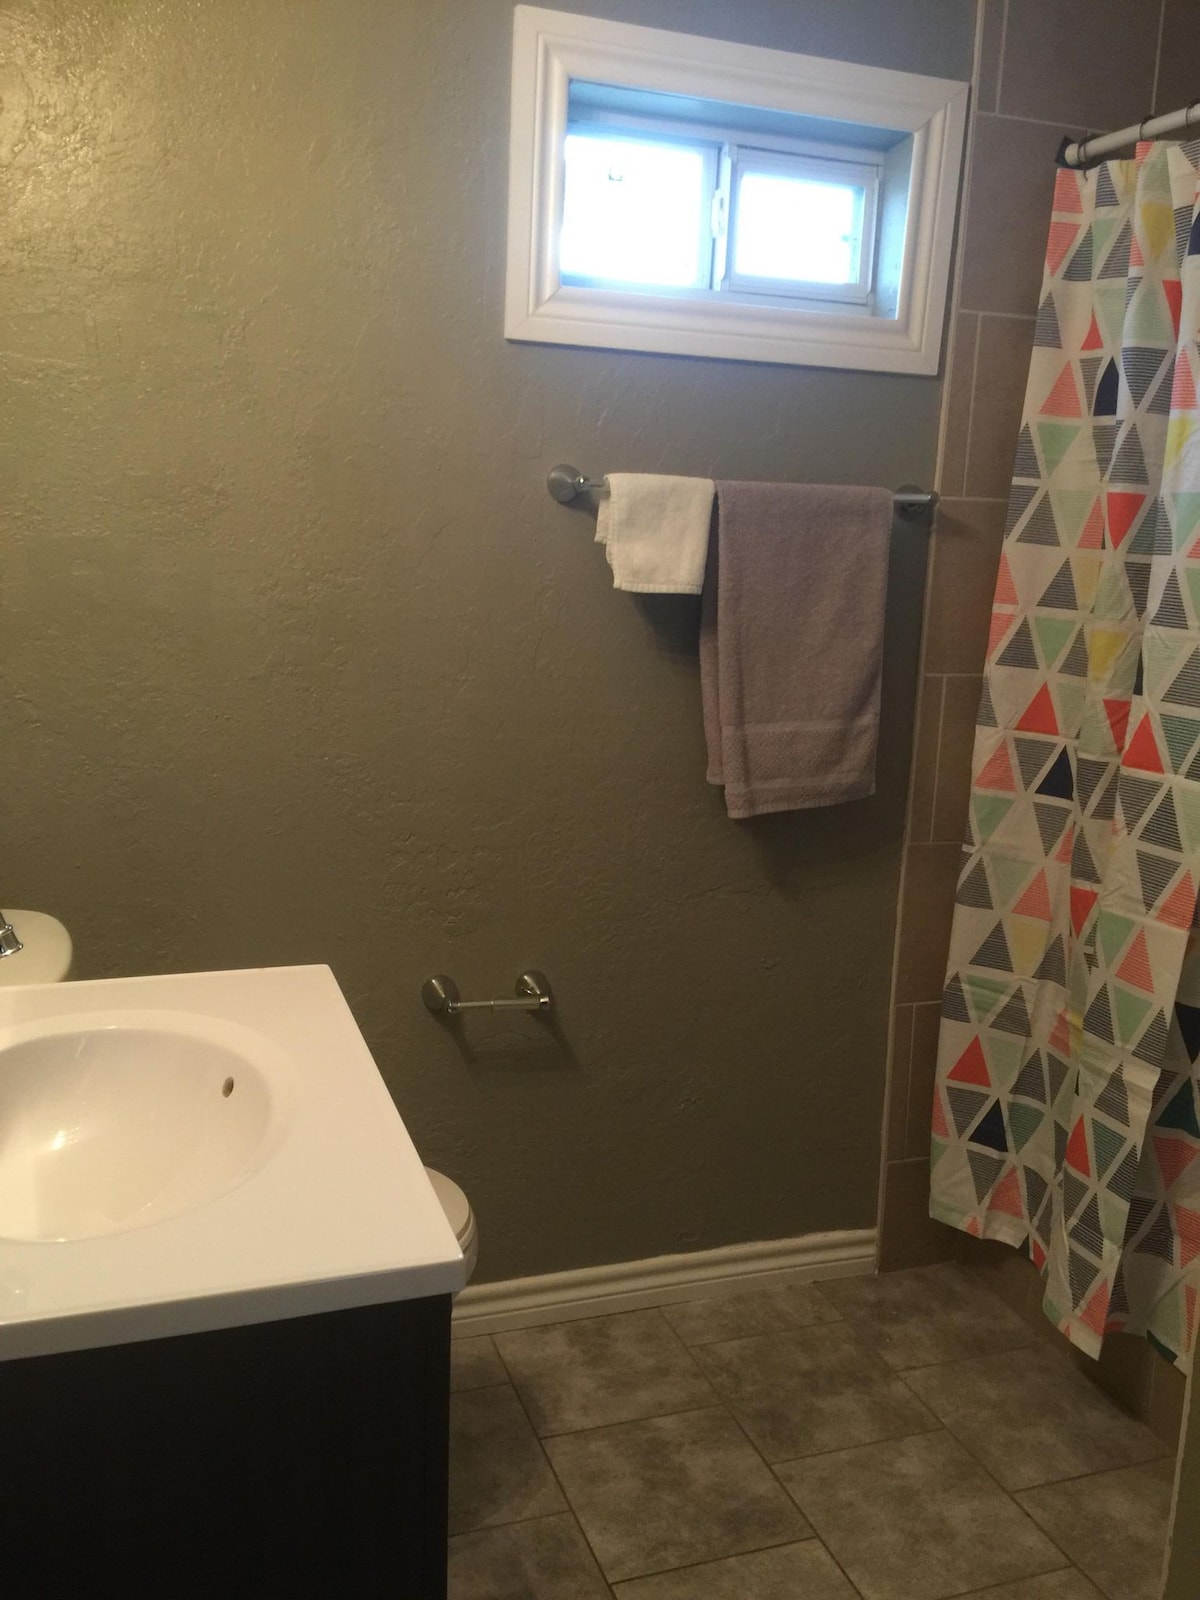 #25 - Lovely 1 Bed minutes to Ft. Sill